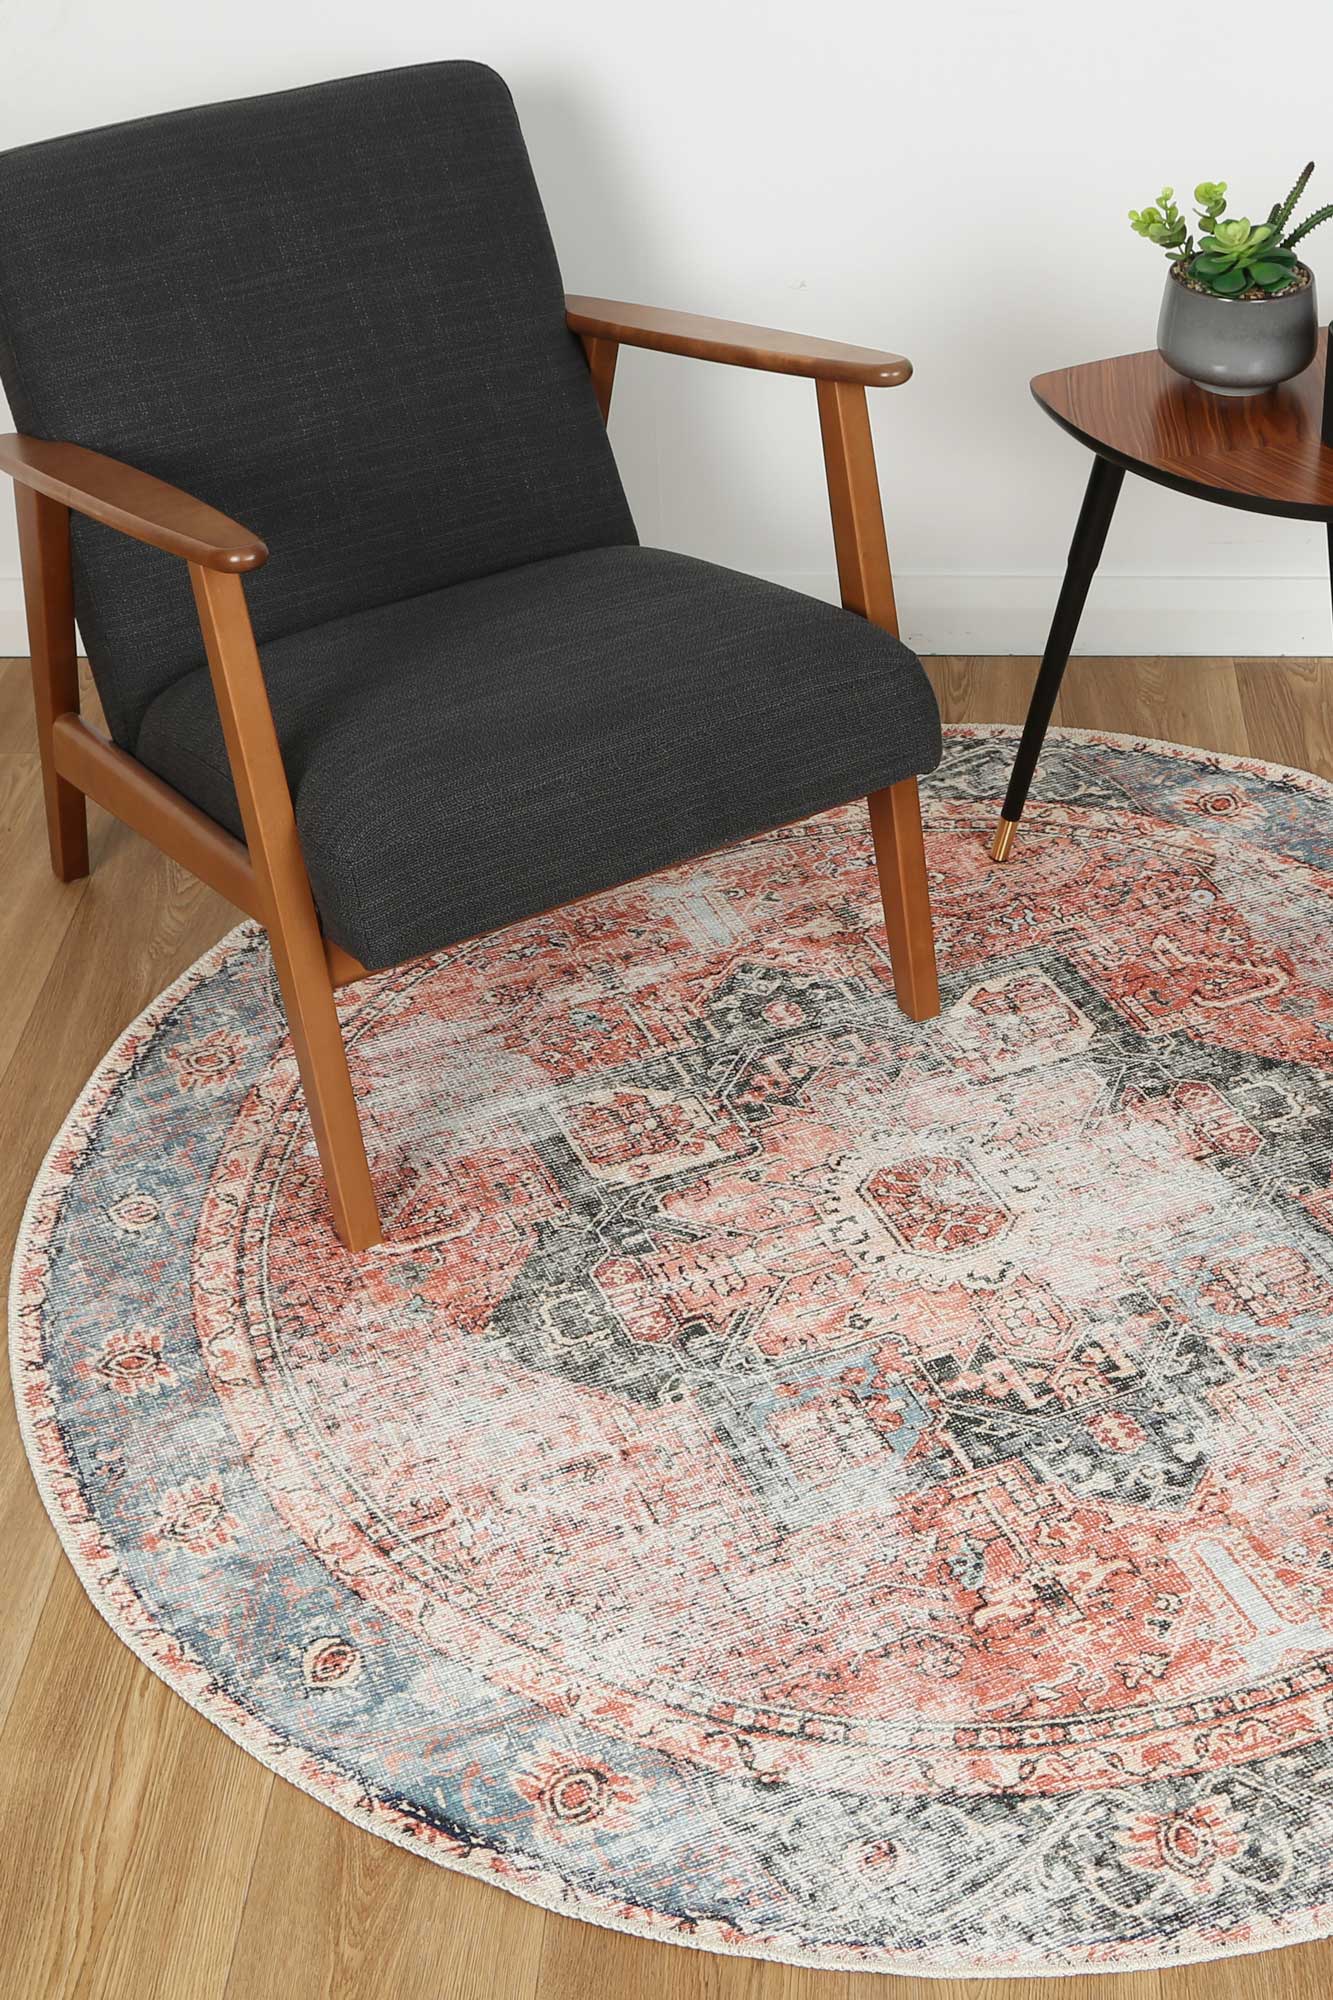 Distressed Vintage Cezanne Terracotta Sky Area Round Rug in Living Room